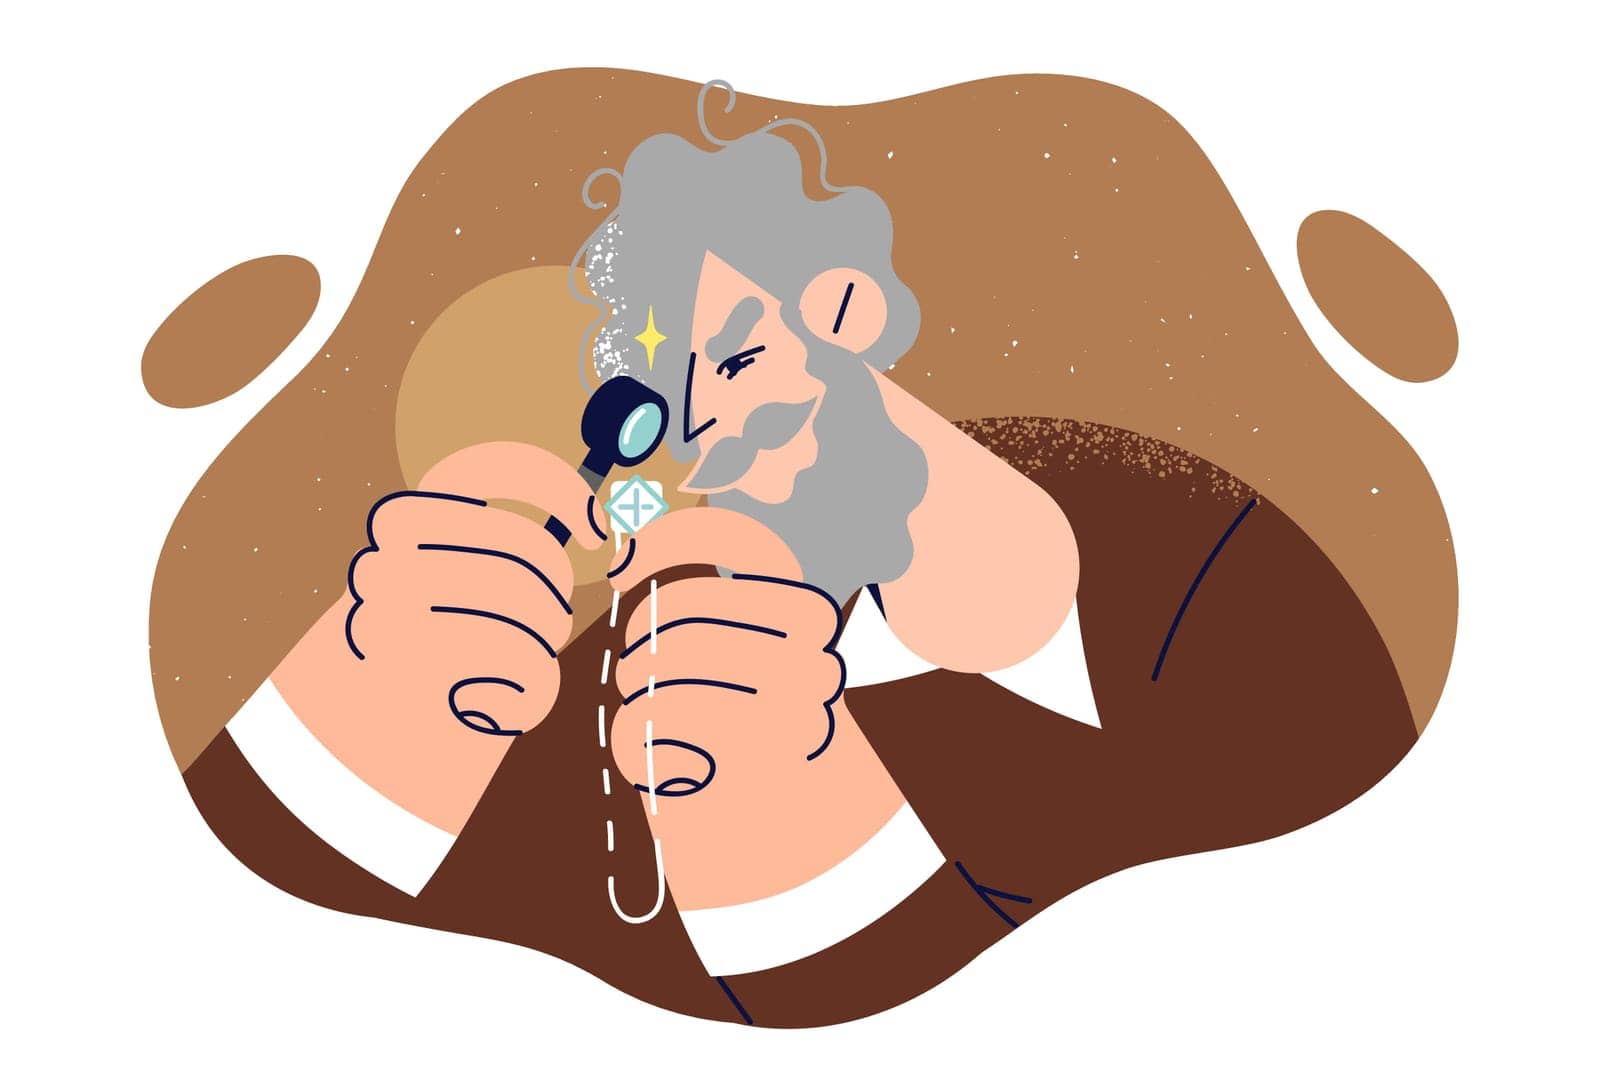 Elderly man jeweler examines silver necklace through magnifying glass to evaluate accessory by Vasilyeu